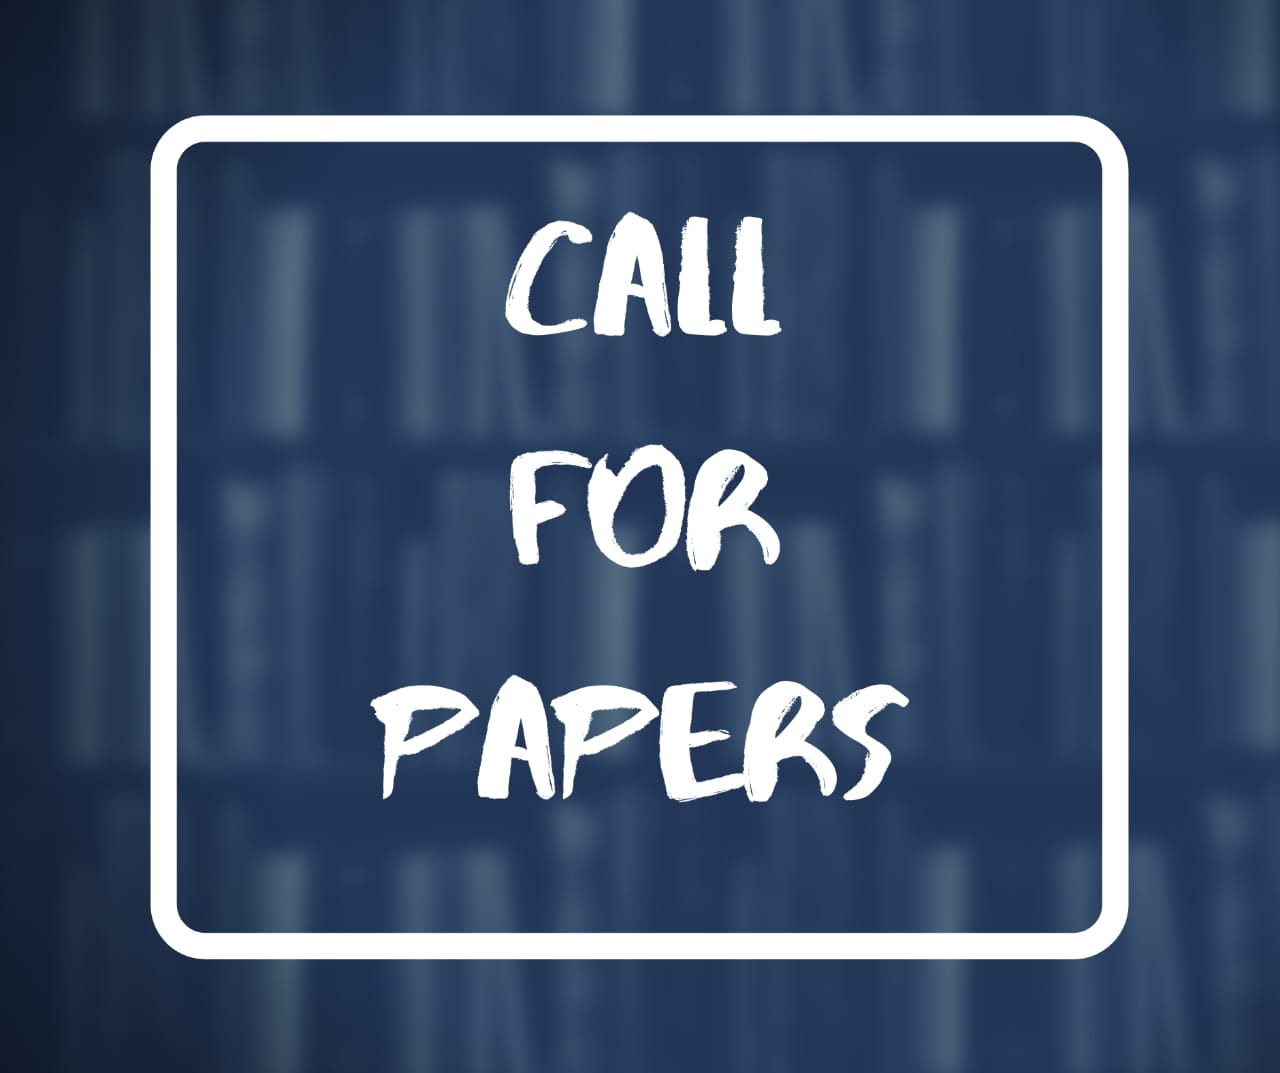 CFP for law students: International Journal of Transparency and Accountability in Governance of NLU Delhi [ISSN No: 2395-4337]: Submit by Nov 30